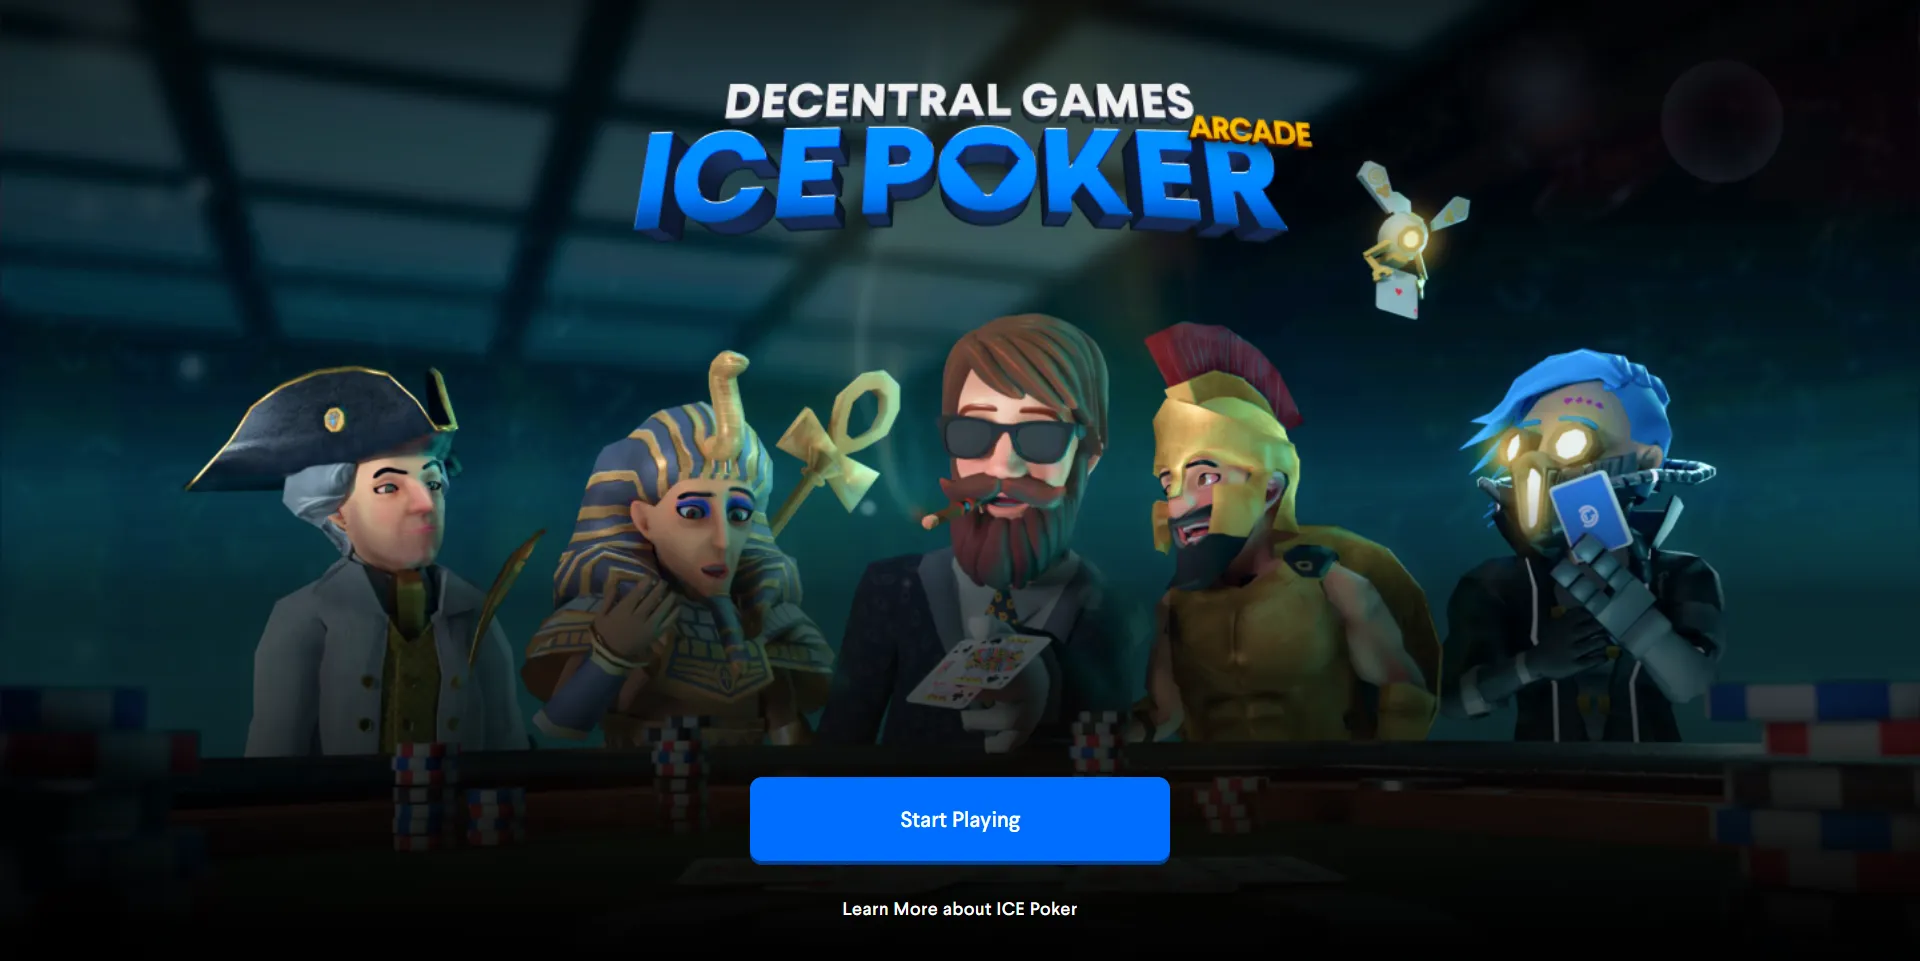 The home screen of Decentral Games ICE Poker serves as the captivating lobby upon opening the game, setting the exhilarating mood for intense poker matches.